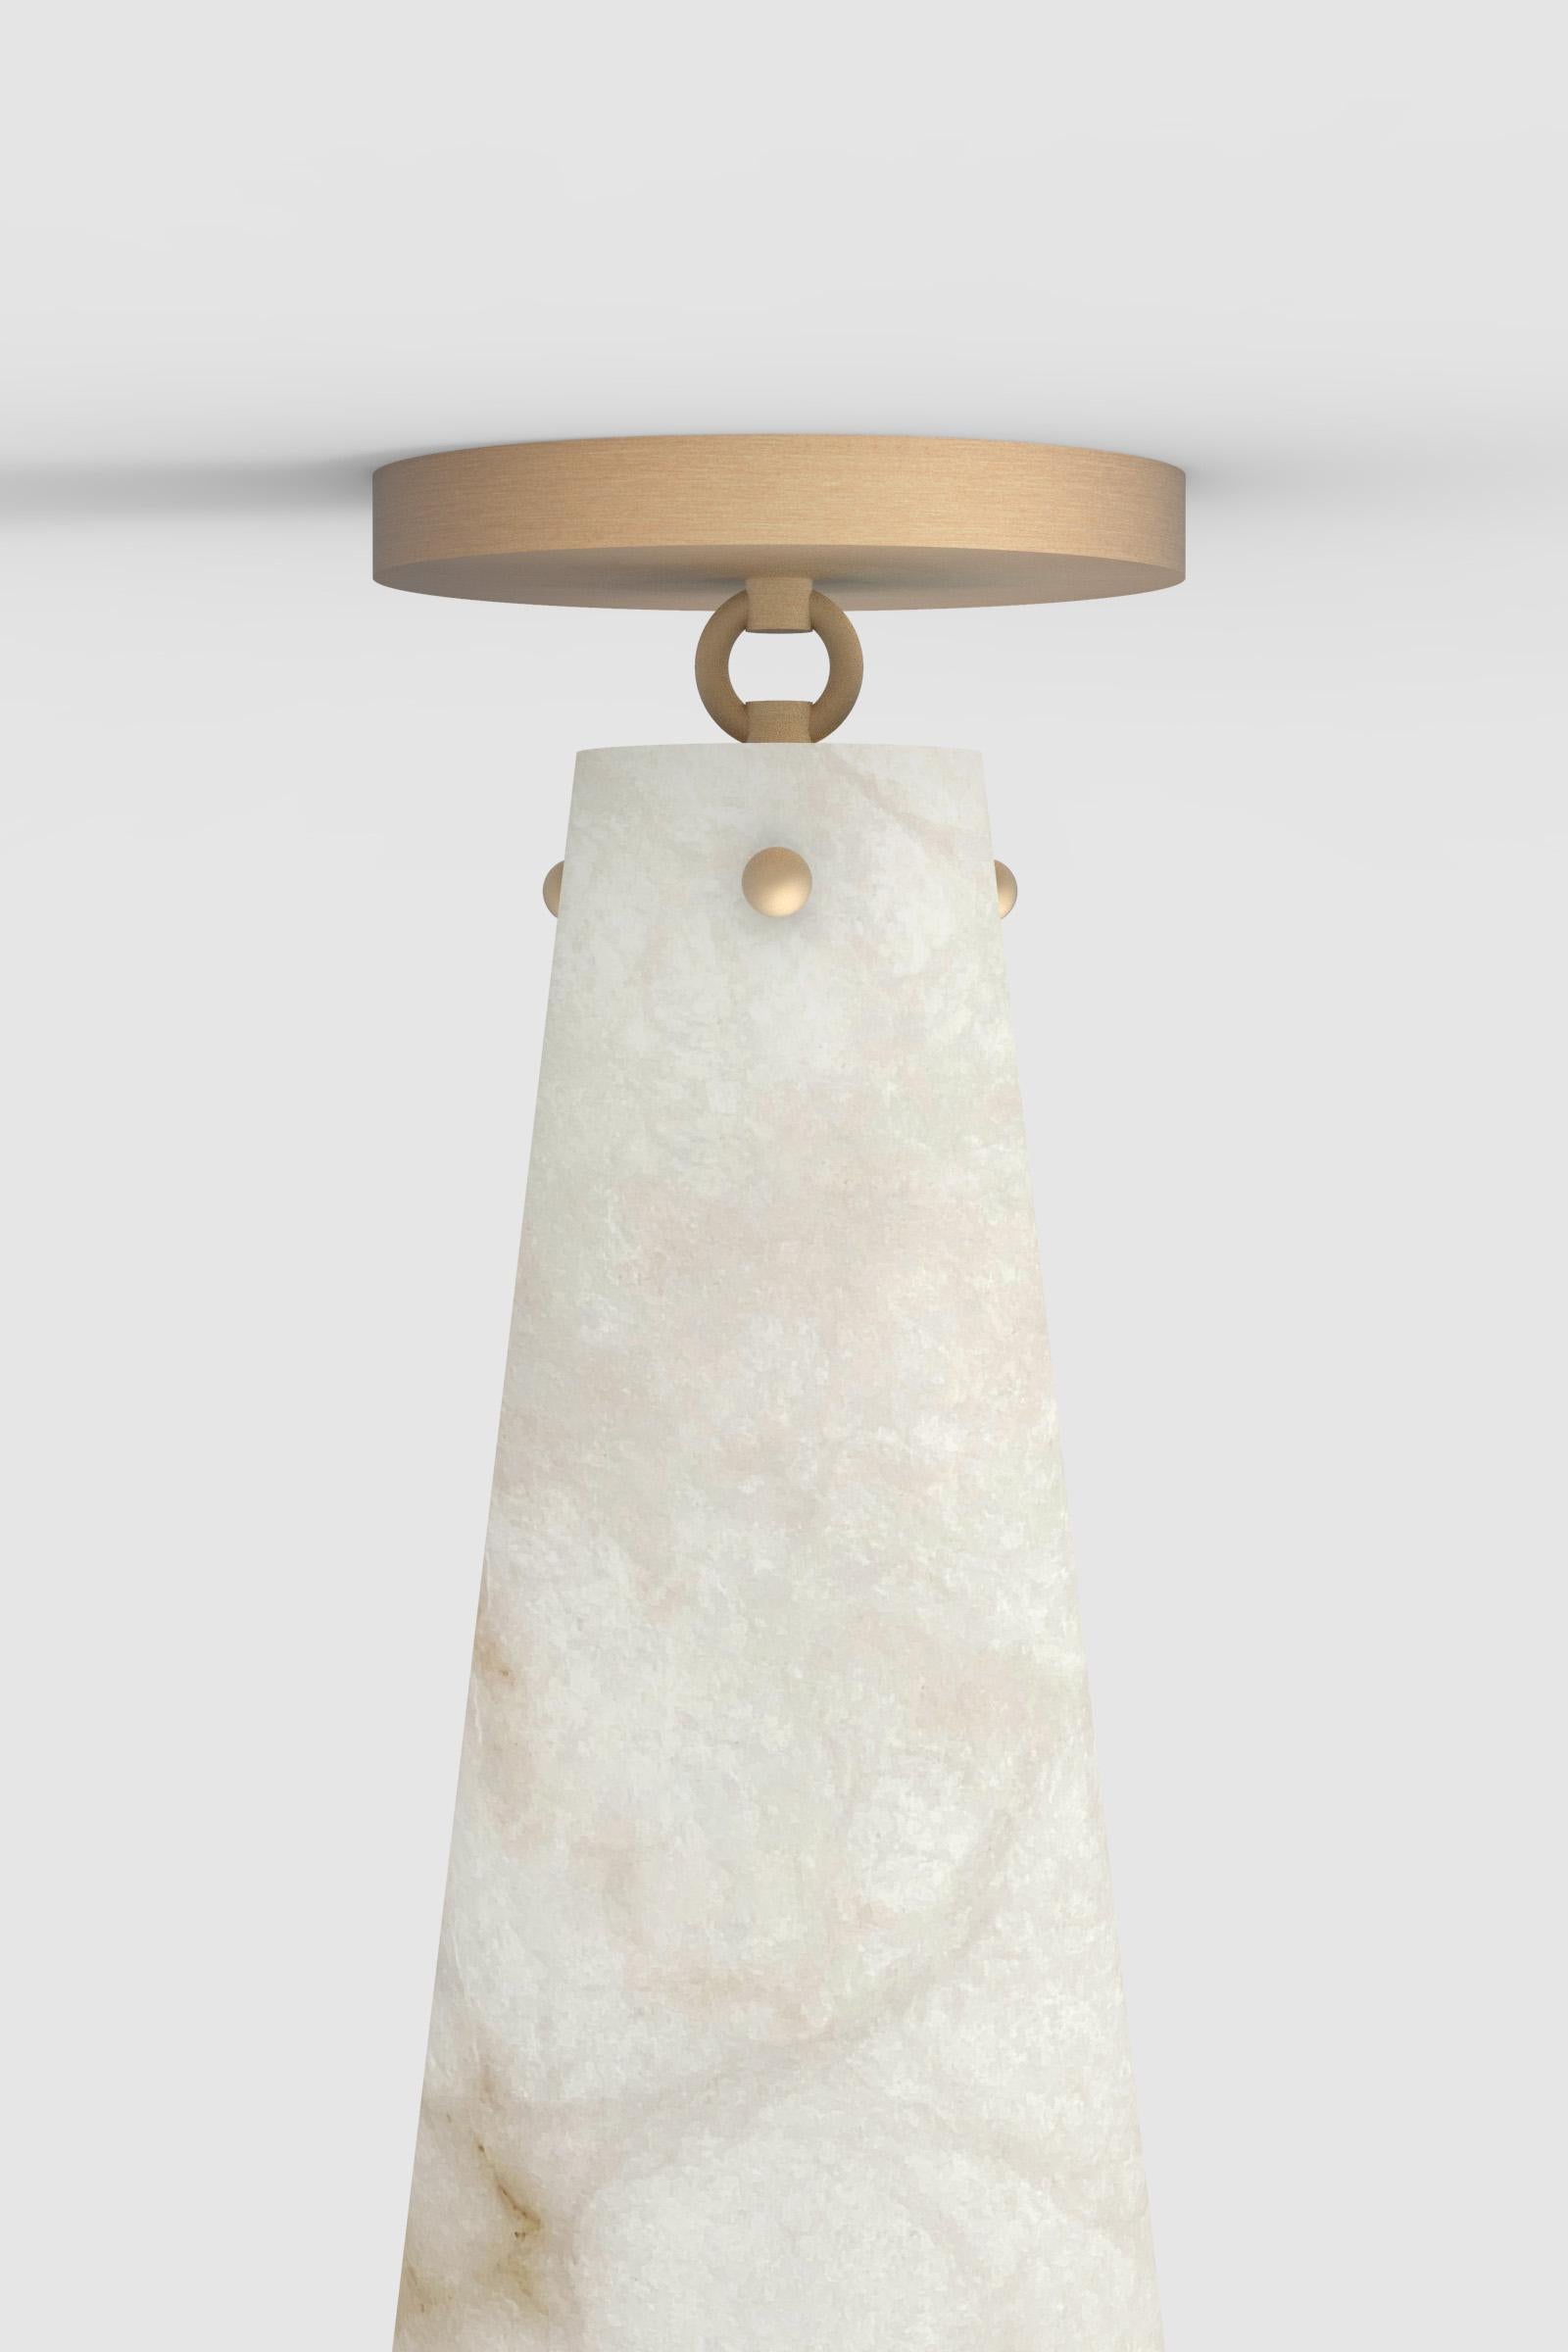 Italian Contemporary Lucca Flush Mount 202A in Alabaster by Orphan Work, 2021 For Sale